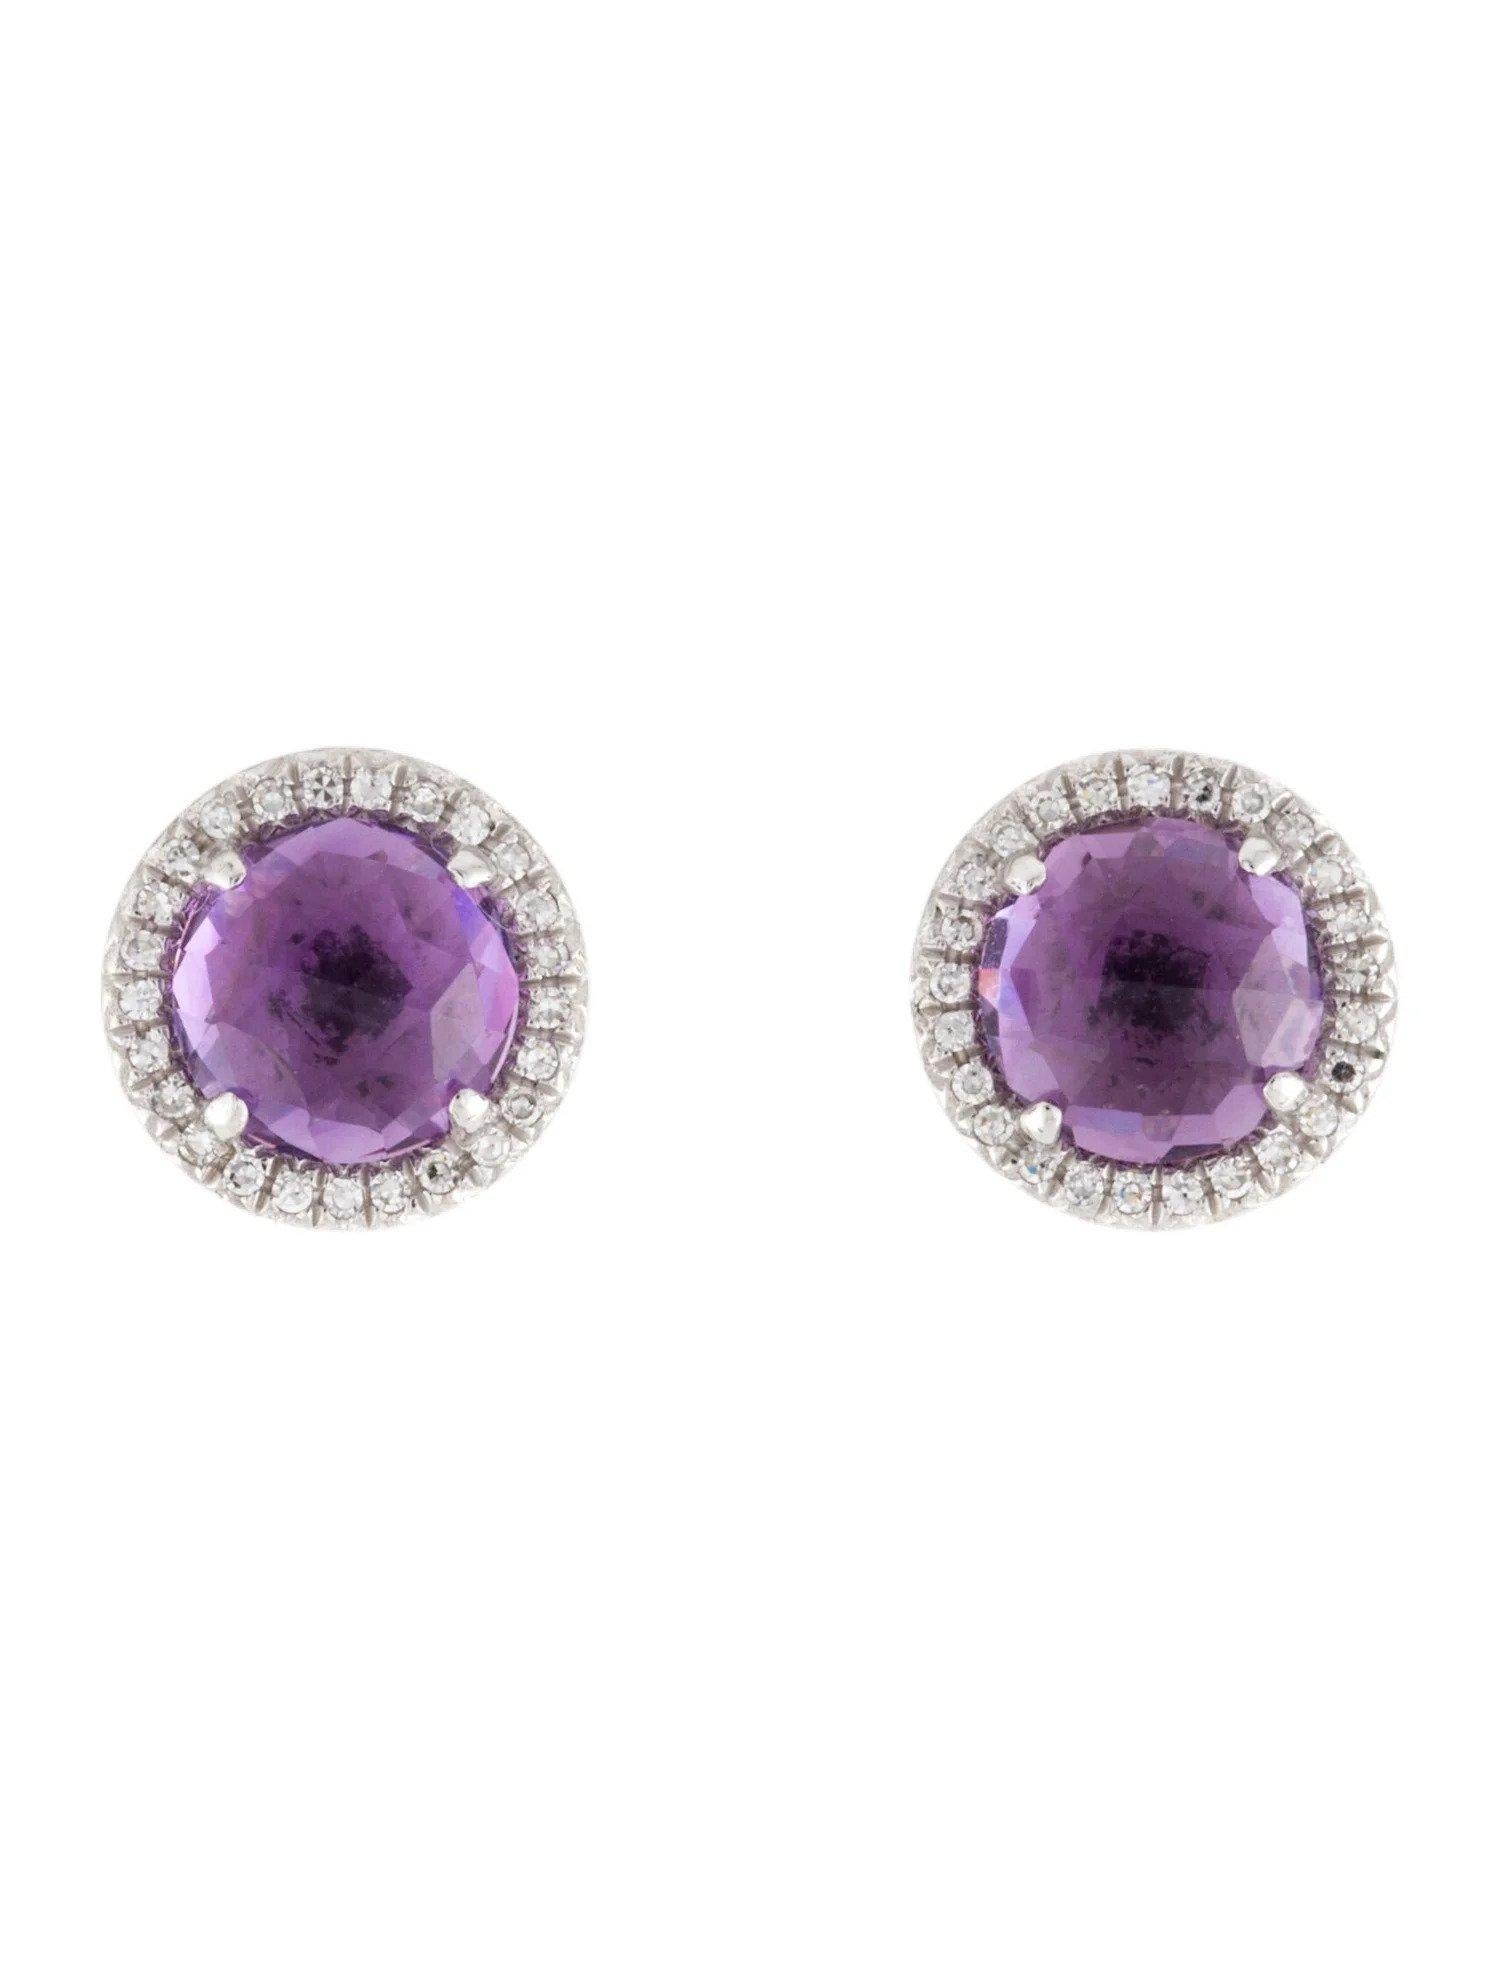 These Amethyst & Diamond Earrings are a stunning and timeless accessory that can add a touch of glamour and sophistication to any outfit. 

These earrings each feature a 0.93 Carat Round Purple Amethyst, with a Diamond Halo comprised of 0.06 Carats